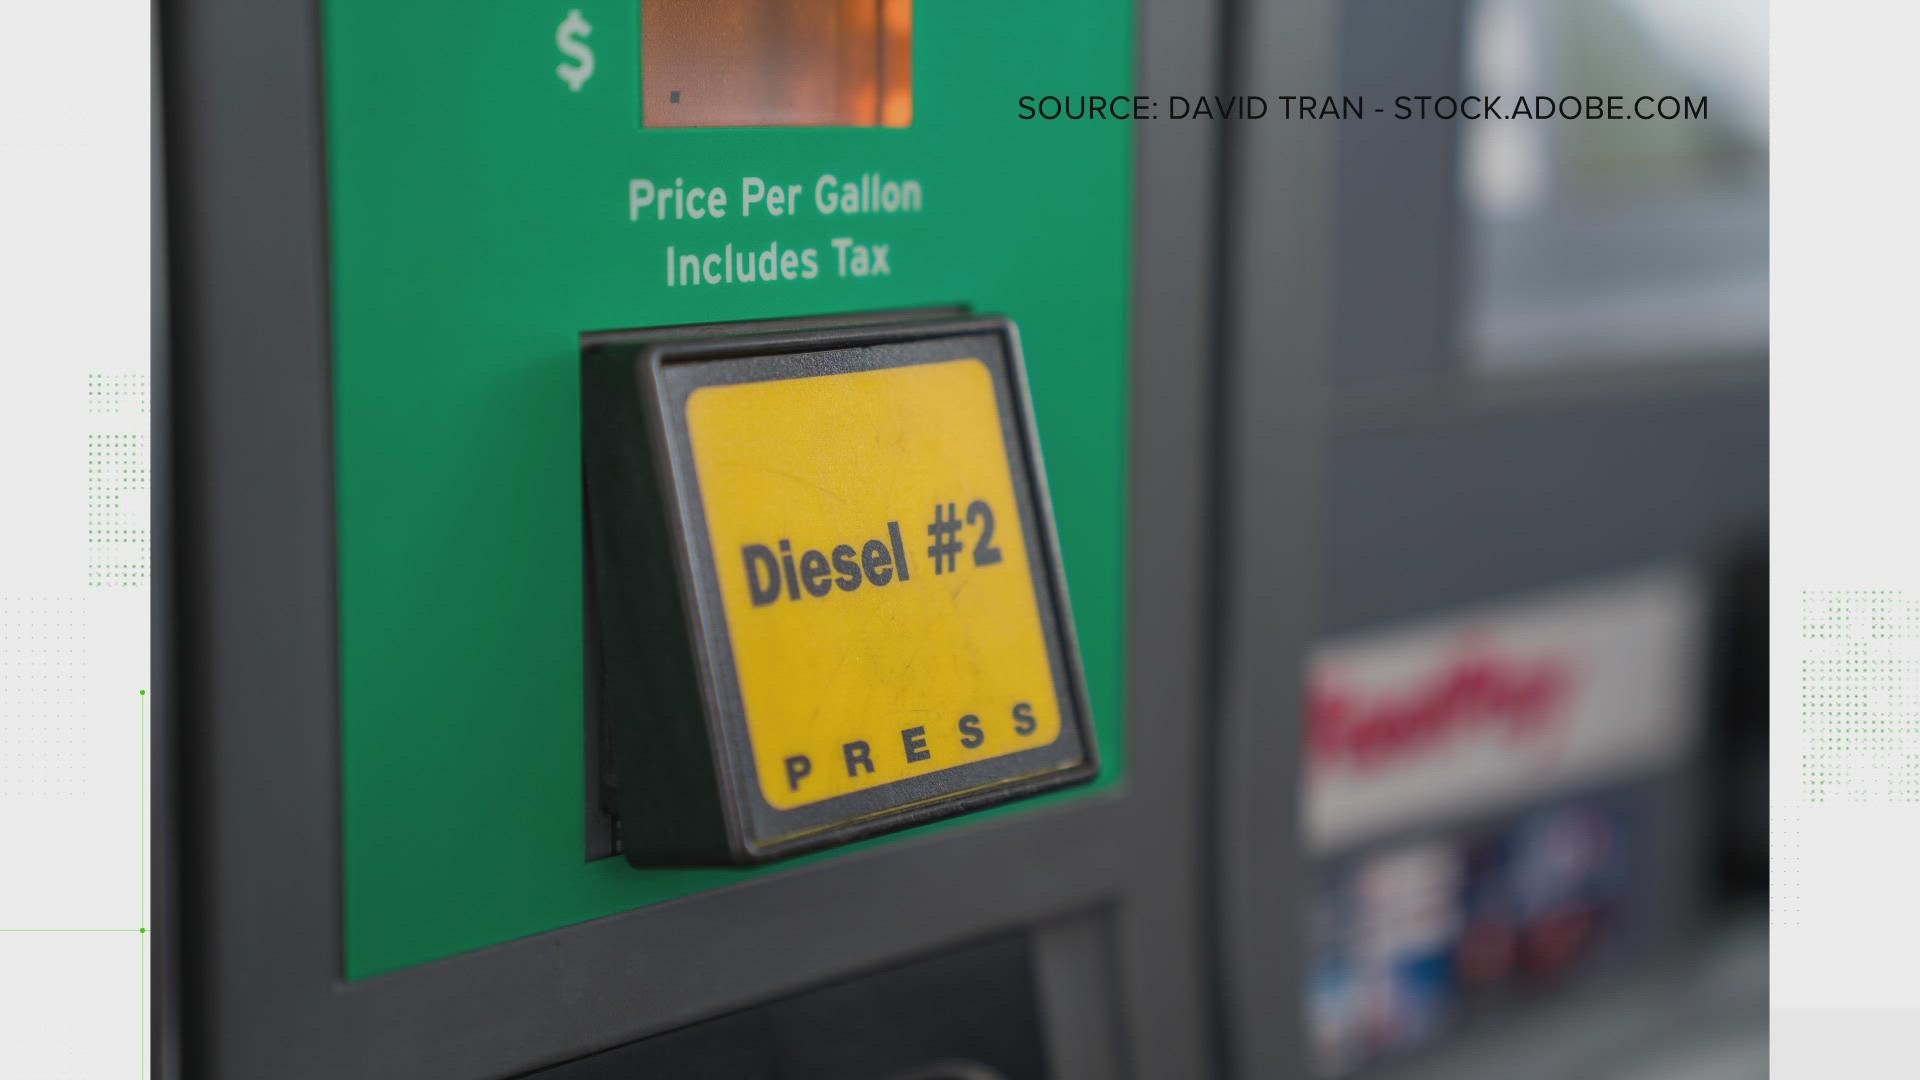 In the early 2000s, changes to demand and fuel emission standards made the historically-cheaper diesel fuel more expensive than gasoline.